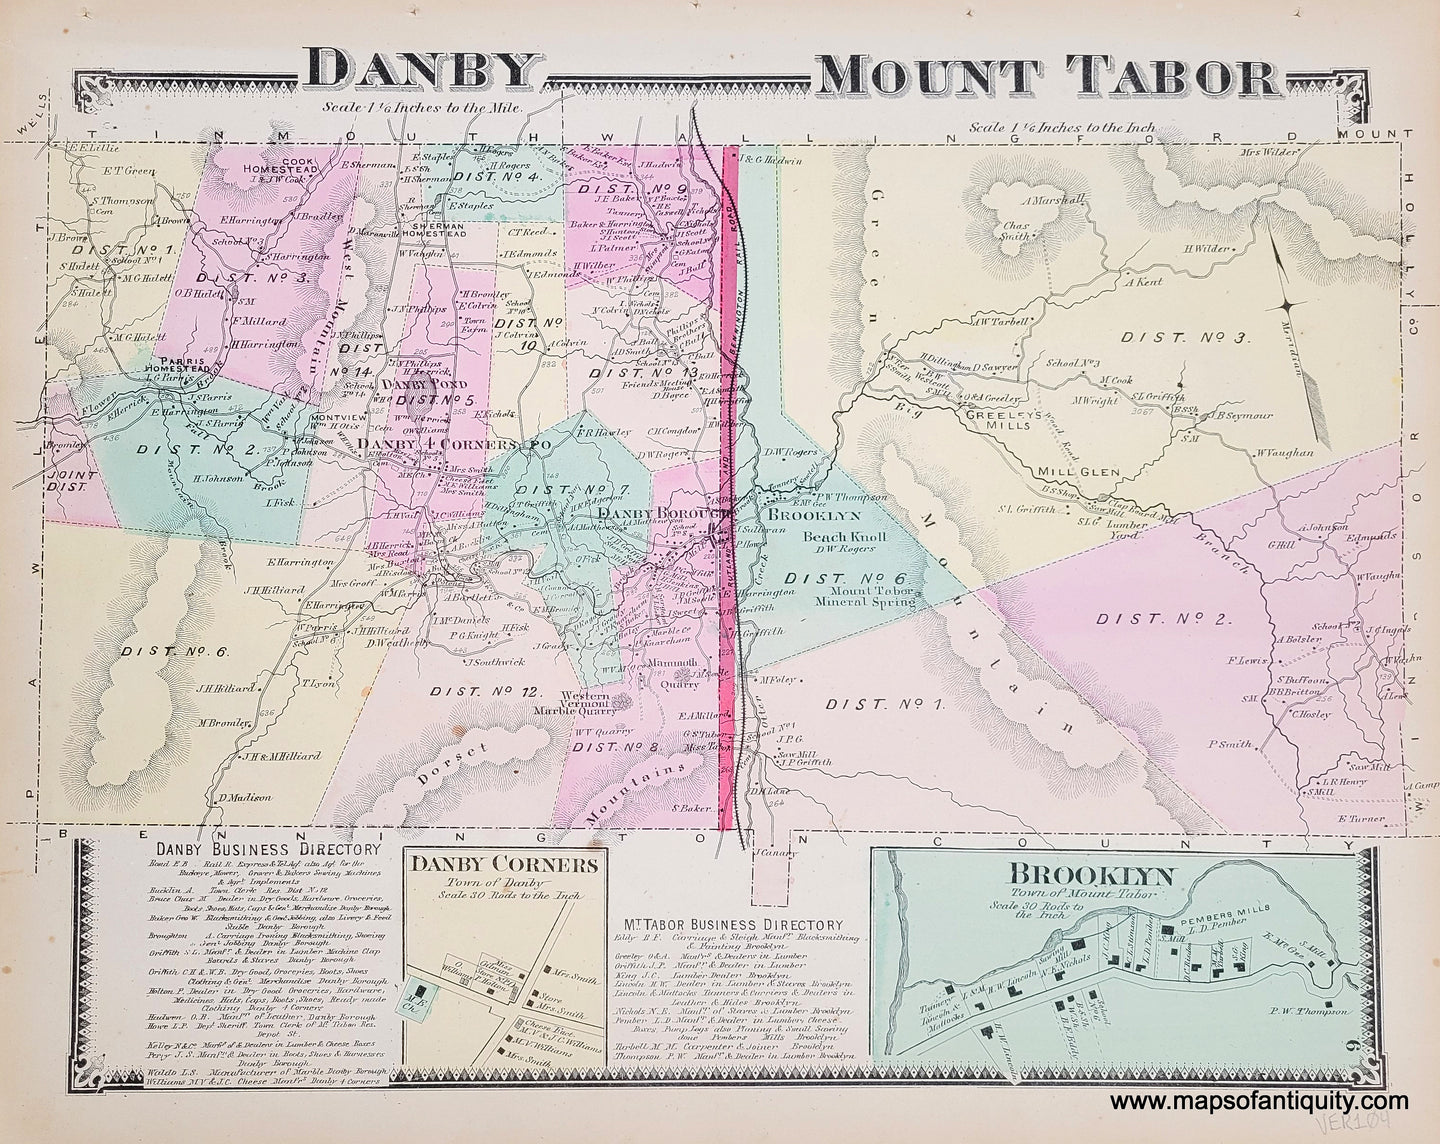 Antique map of Danby and Mount Tabor Vermont VT, hand-colored by district in colors of pale yellow, green, pink, and peach. It shows property owners names along the roads, with rivers and mountains. At the bottom are a Danby business directory, a small enlargement of Danby Corners, a Mt Tabor business directory, and an enlargement of Brooklyn, which is part of Mount Tabor.